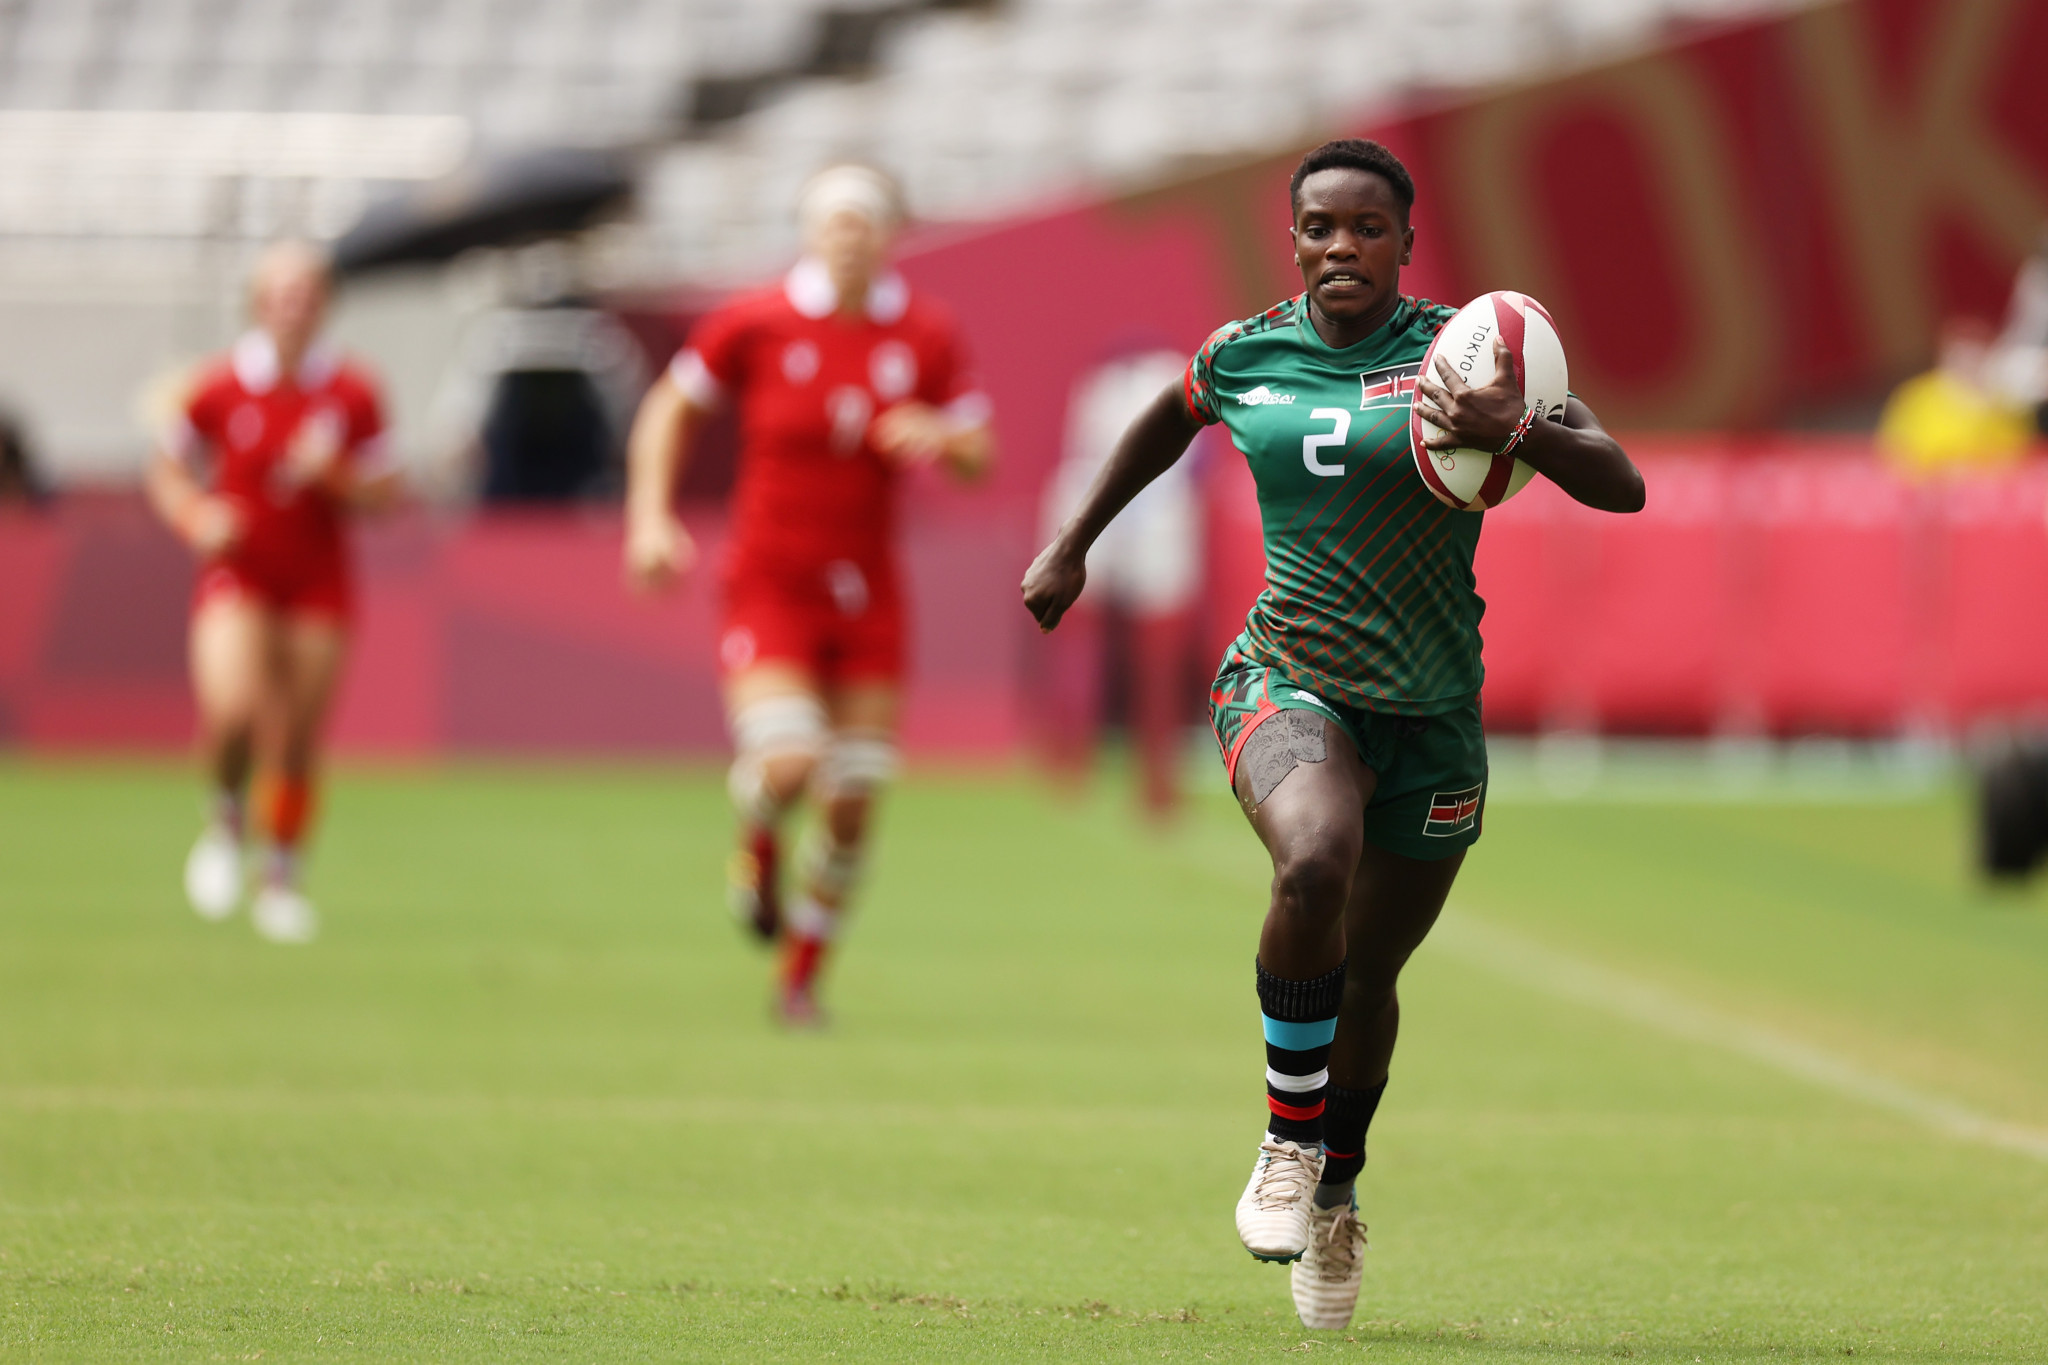 Kenya qualified both its men's and women's teams for the Olympic rugby sevens tournament at Tokyo 2020 ©Getty Images